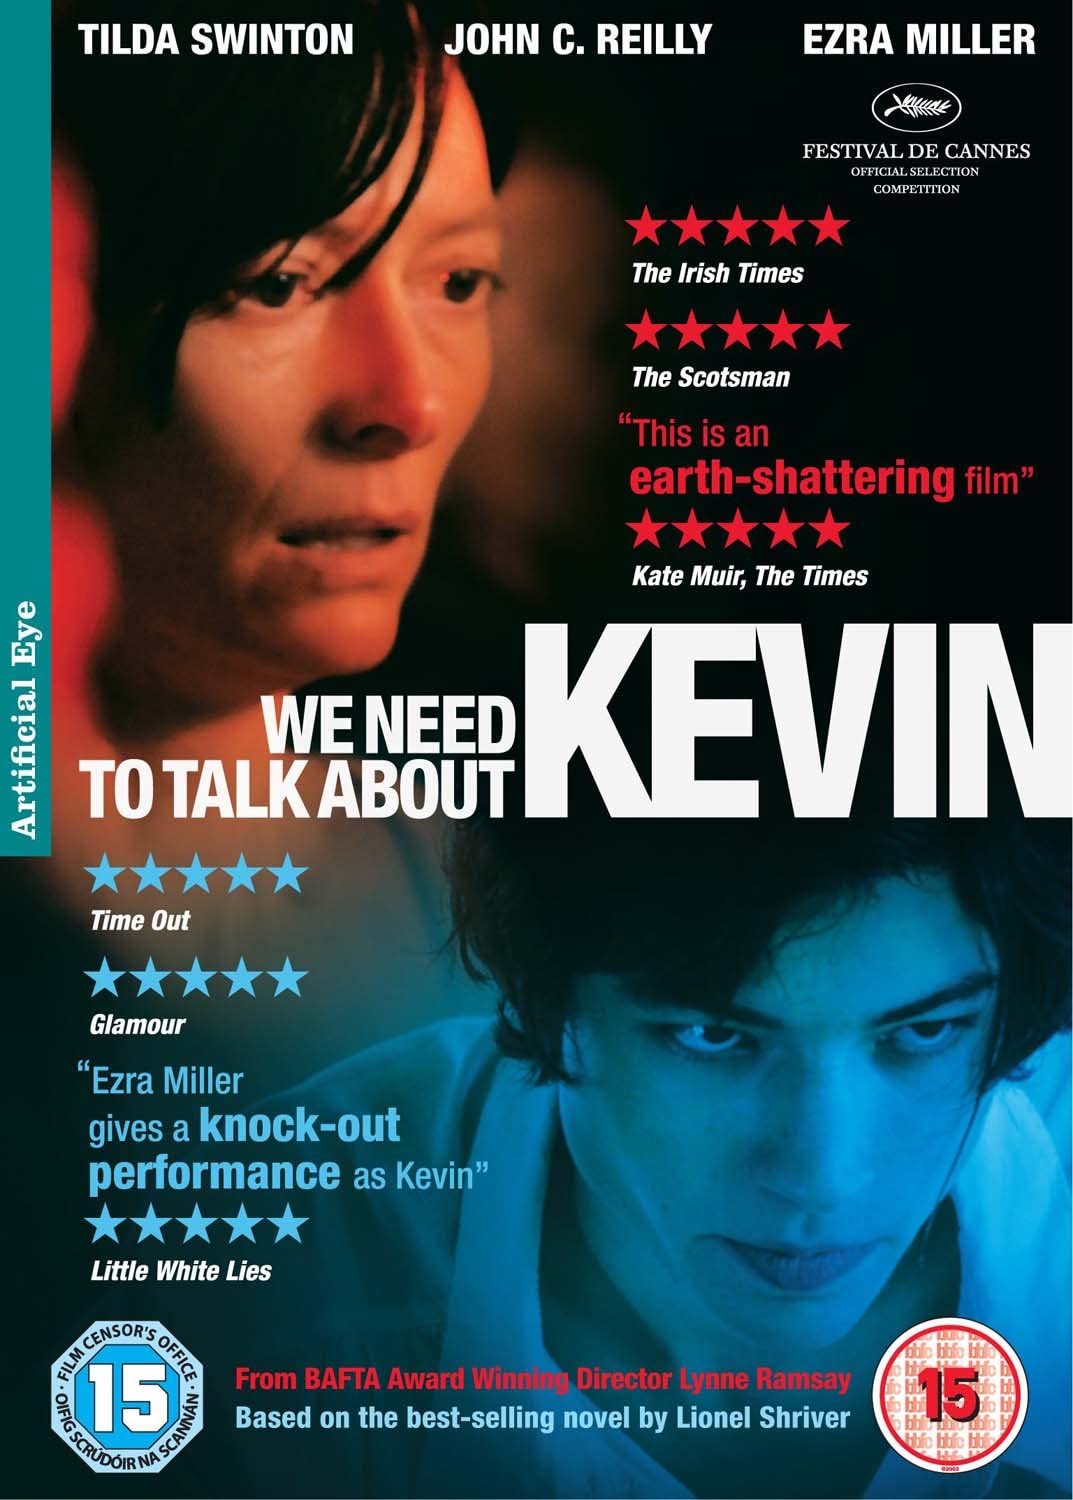 We Need to Talk About Kevin (2011) - Drama/Thriller [DVD]